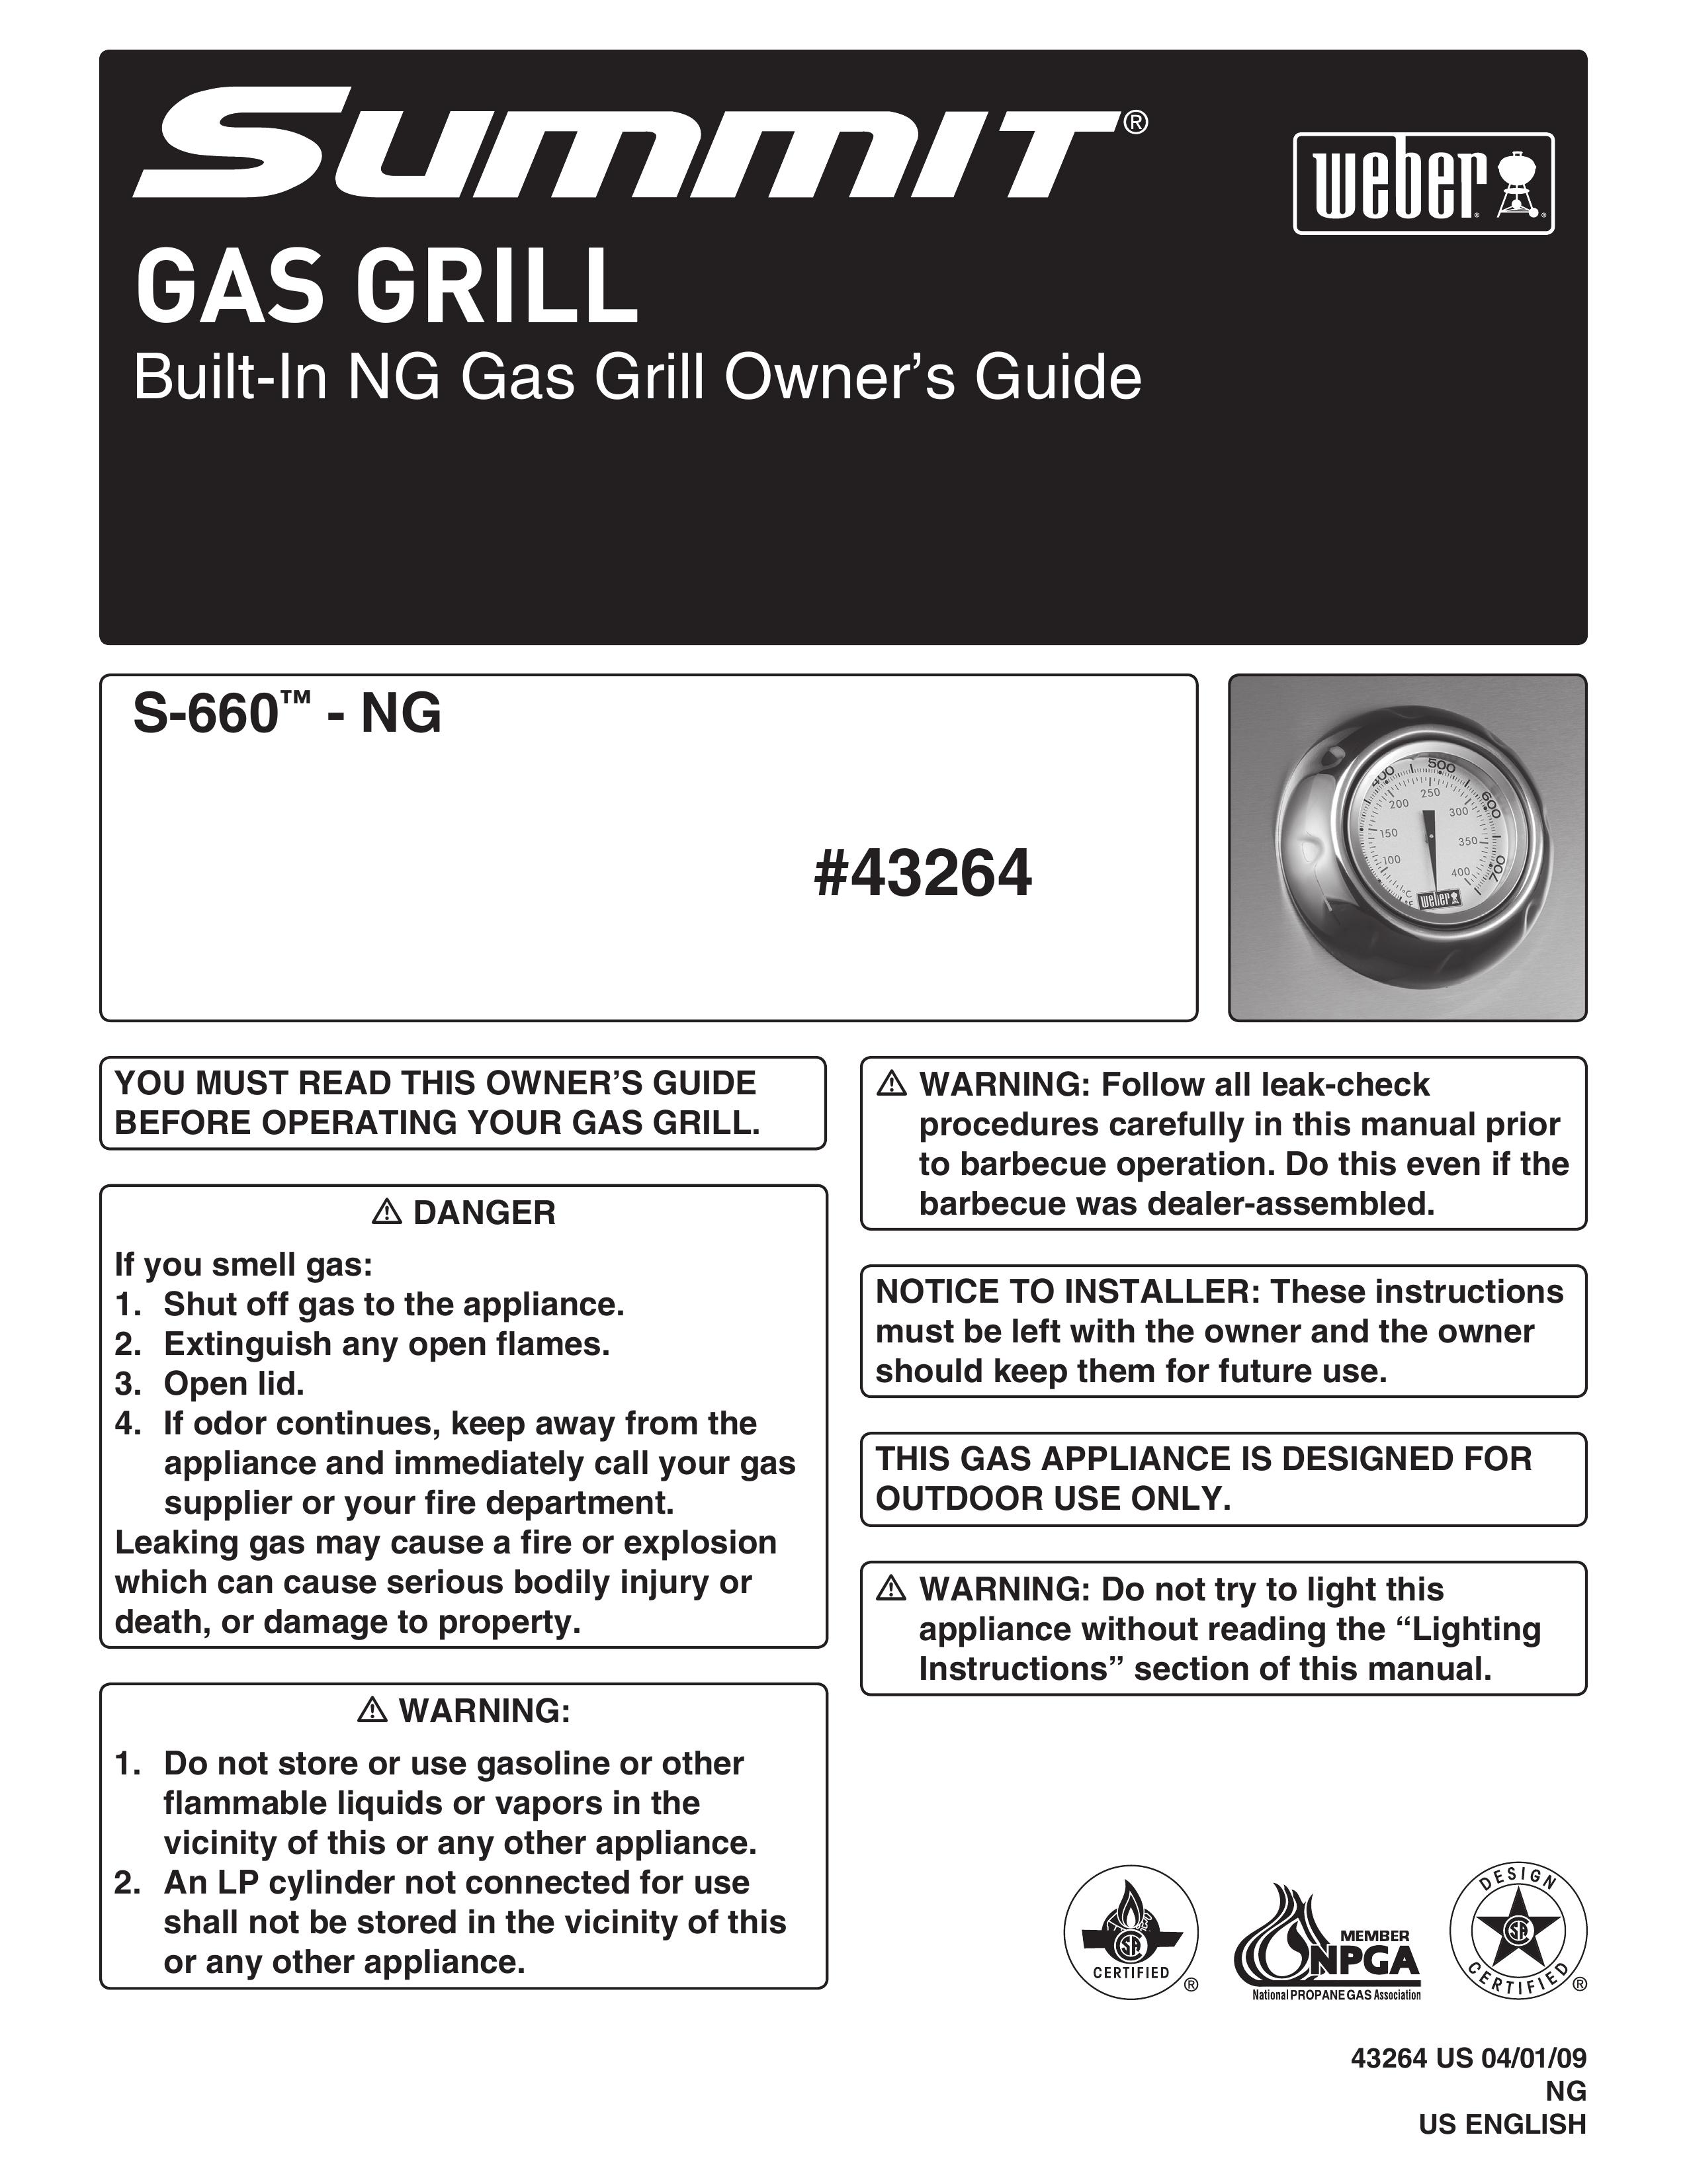 Weber 294001 Gas Grill User Manual